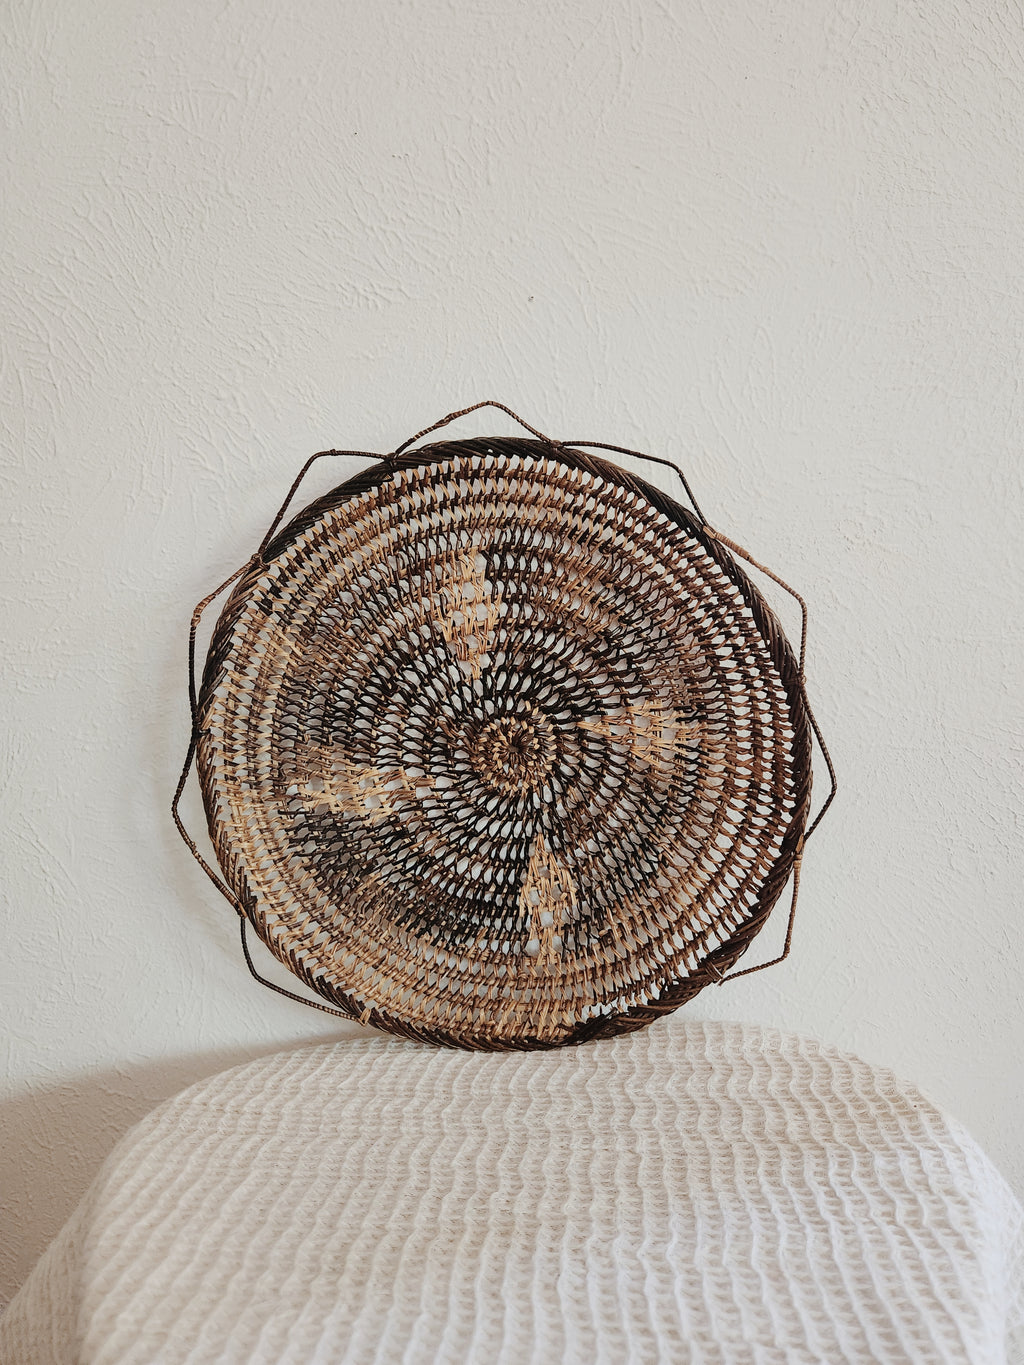 Vintage Round Basket | Wall gallery | Shelf decor | Home styling